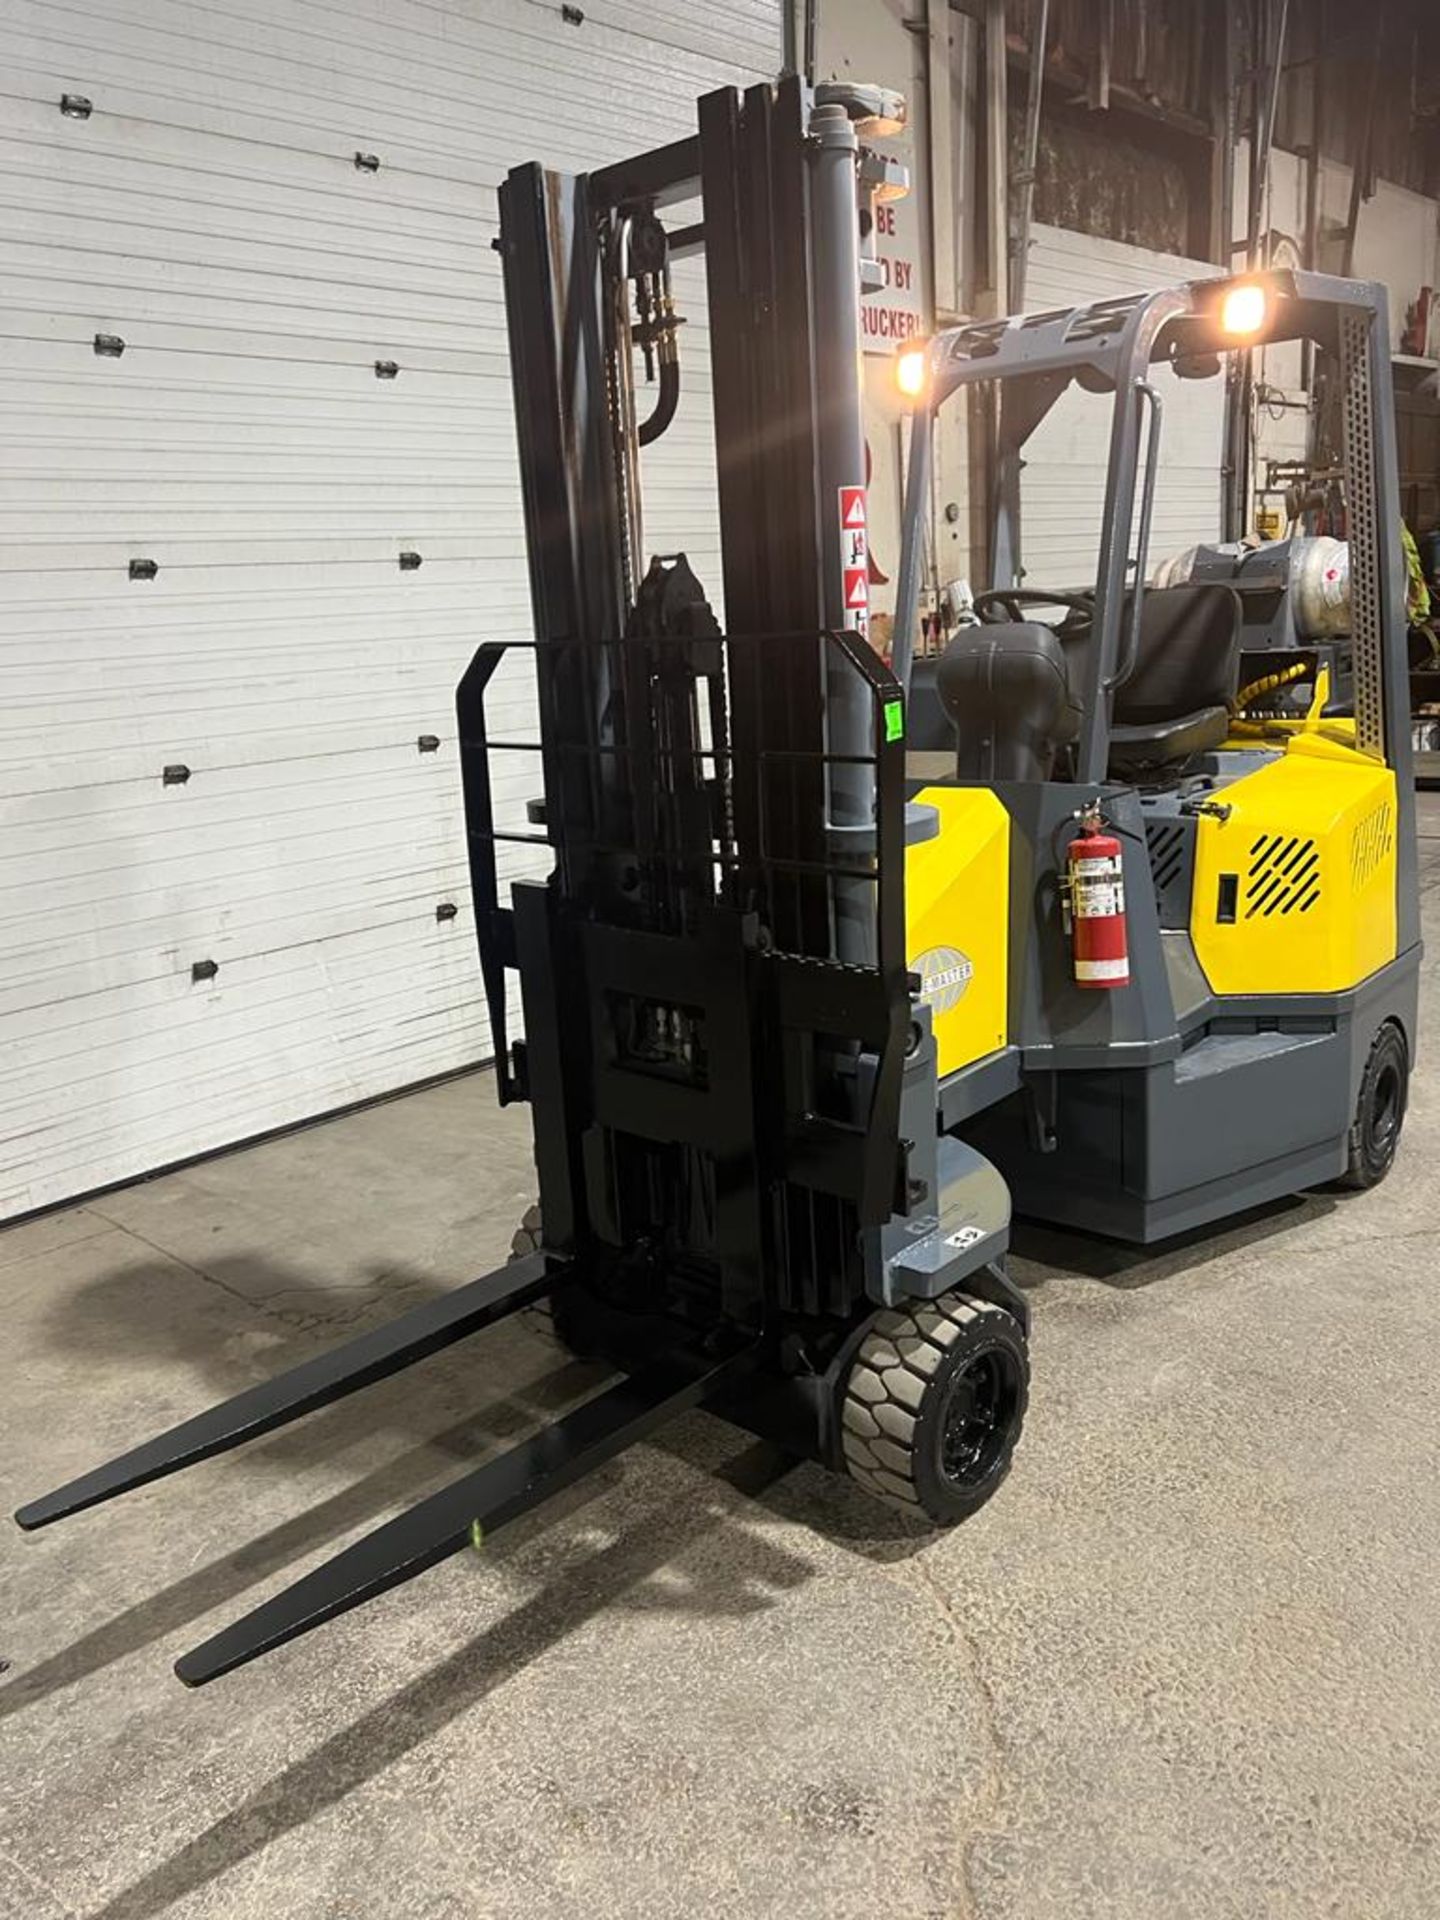 Aisle-Master 4,000lbs Capacity Sideloader Forklift LPG (Propane) with sideshift & 3-stage Mast - Image 7 of 8